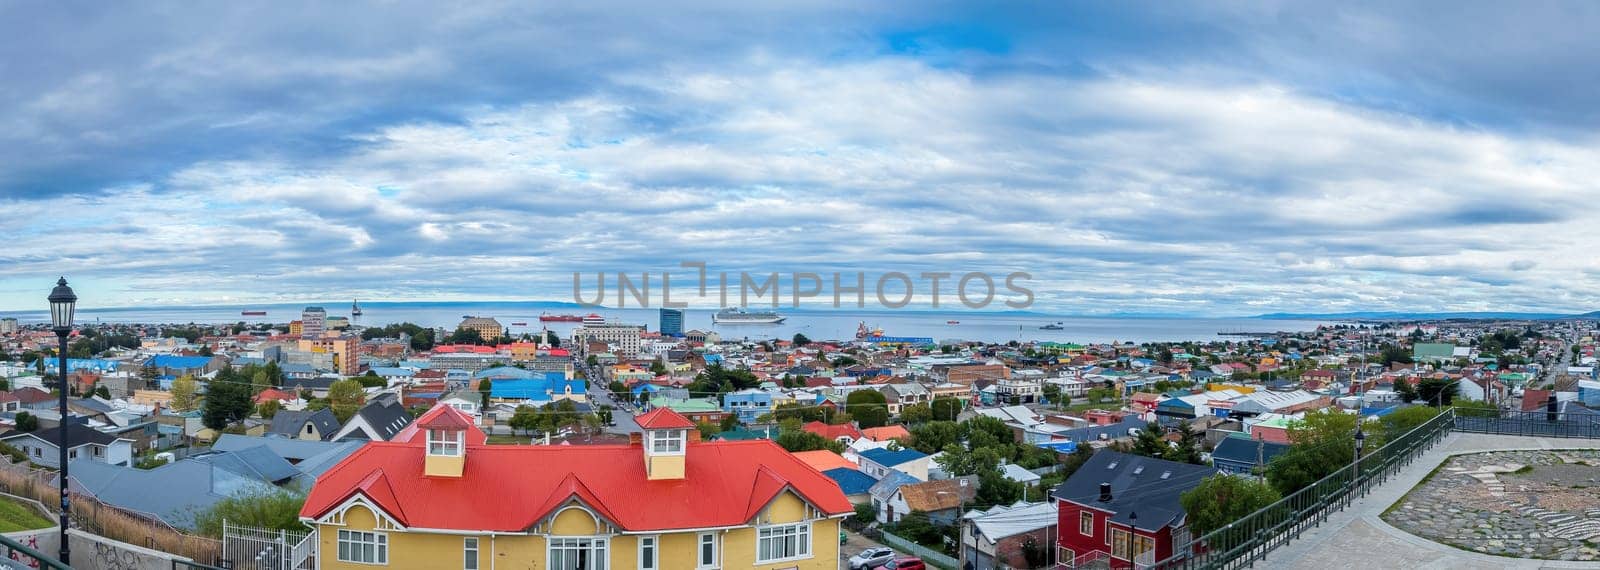 Expansive panoramic view of a colorful coastal town of Punta Arenas by FerradalFCG